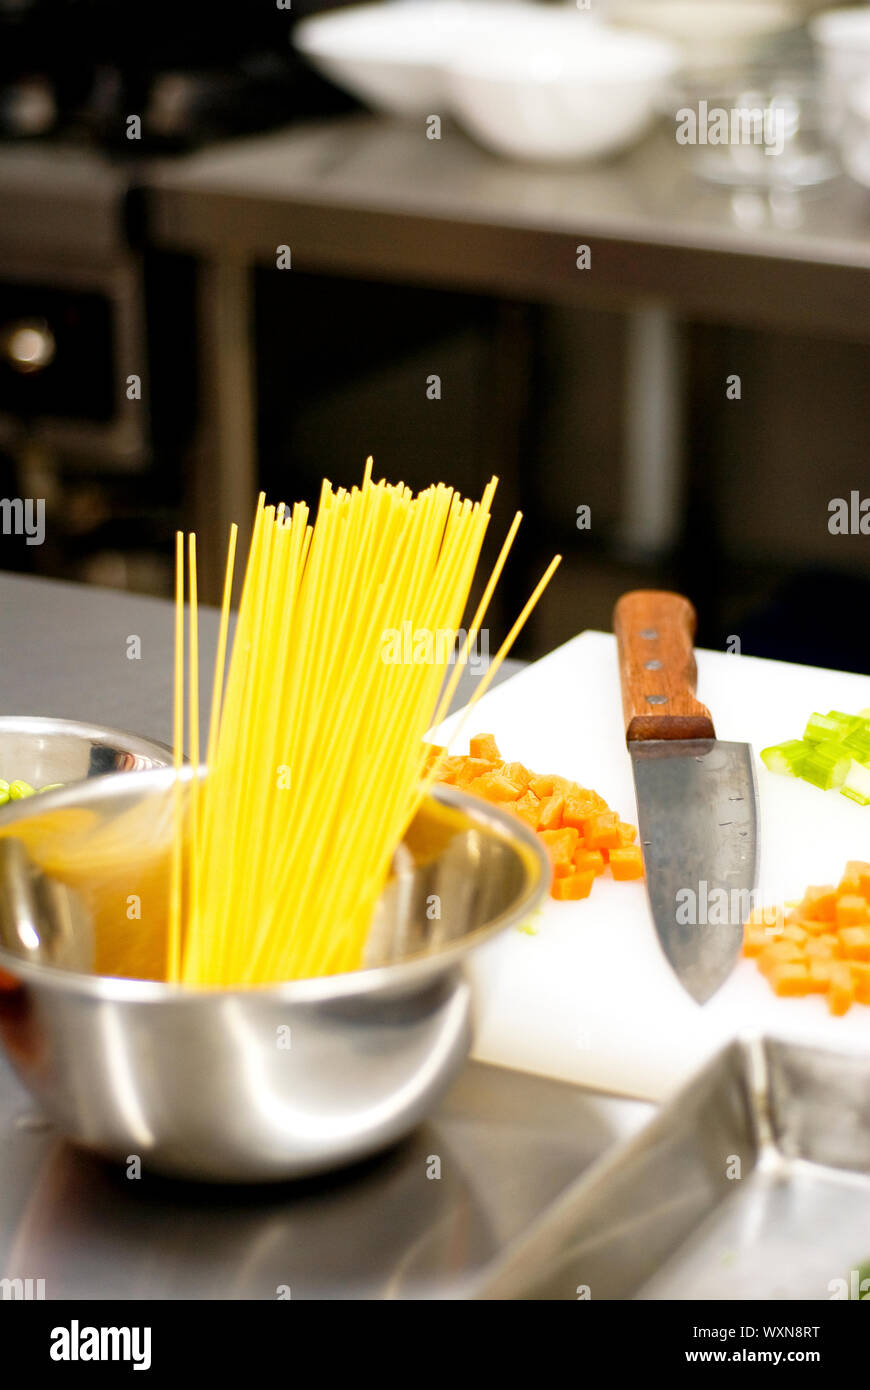 Italian Spaghetti Pasta On A Typical Full Equipped Restaurant Kitchen WXN8RT 